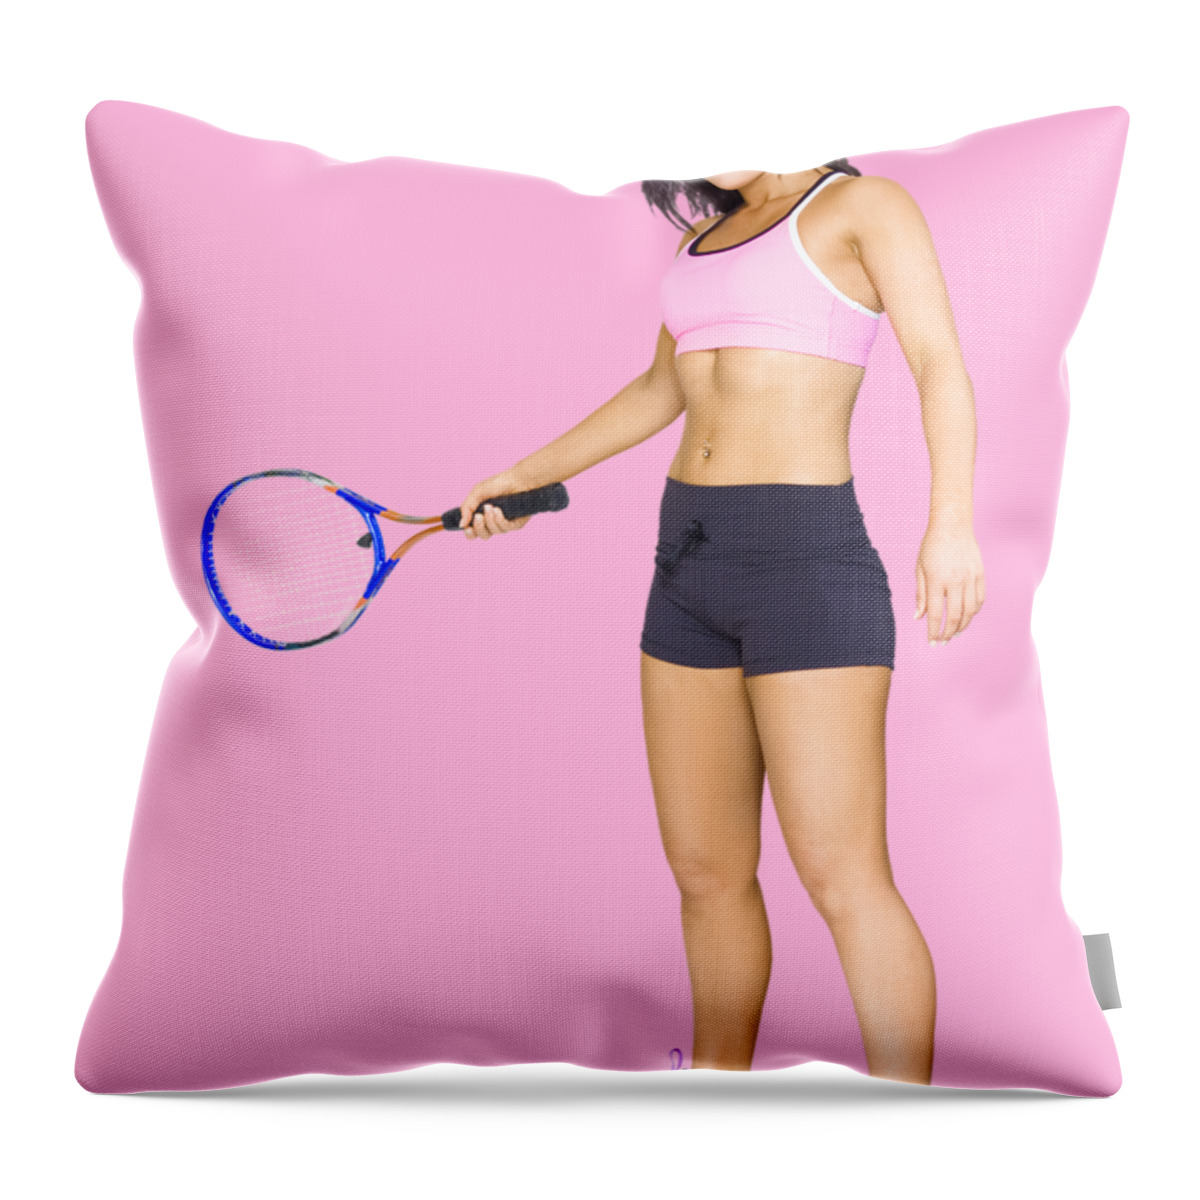 Tennis Throw Pillow featuring the photograph Fit Active Female Sports Person Playing Tennis by Jorgo Photography